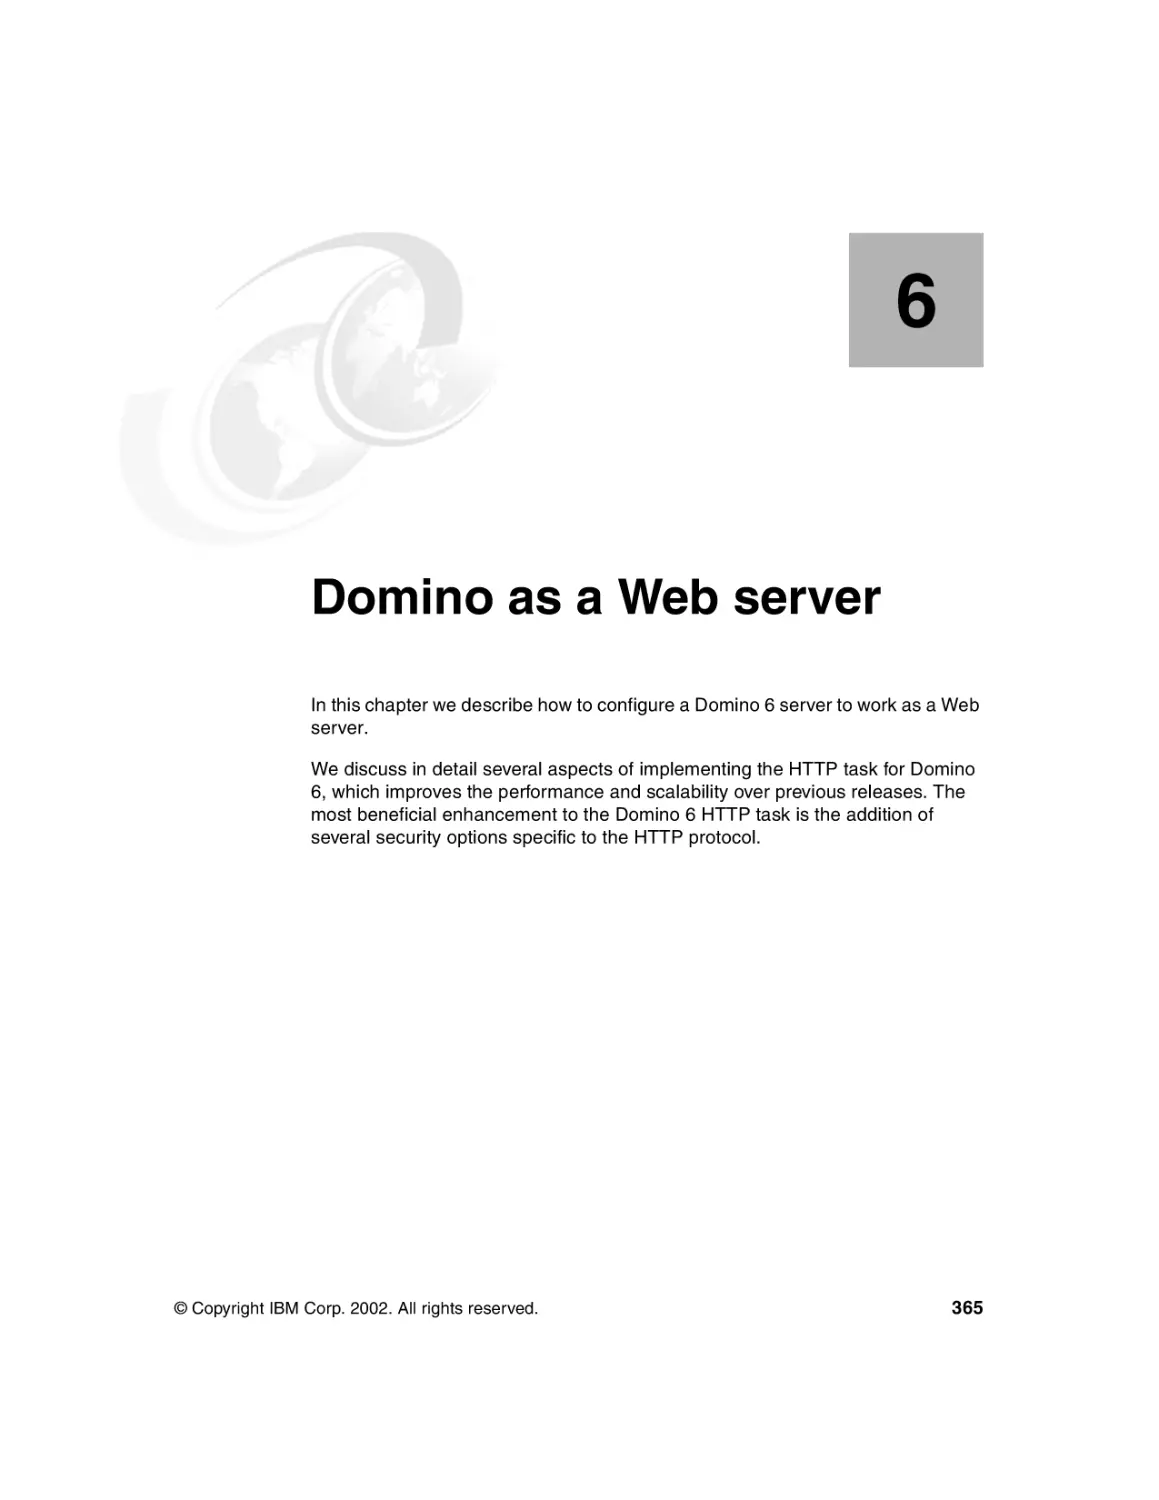 Chapter 6. Domino as a Web server